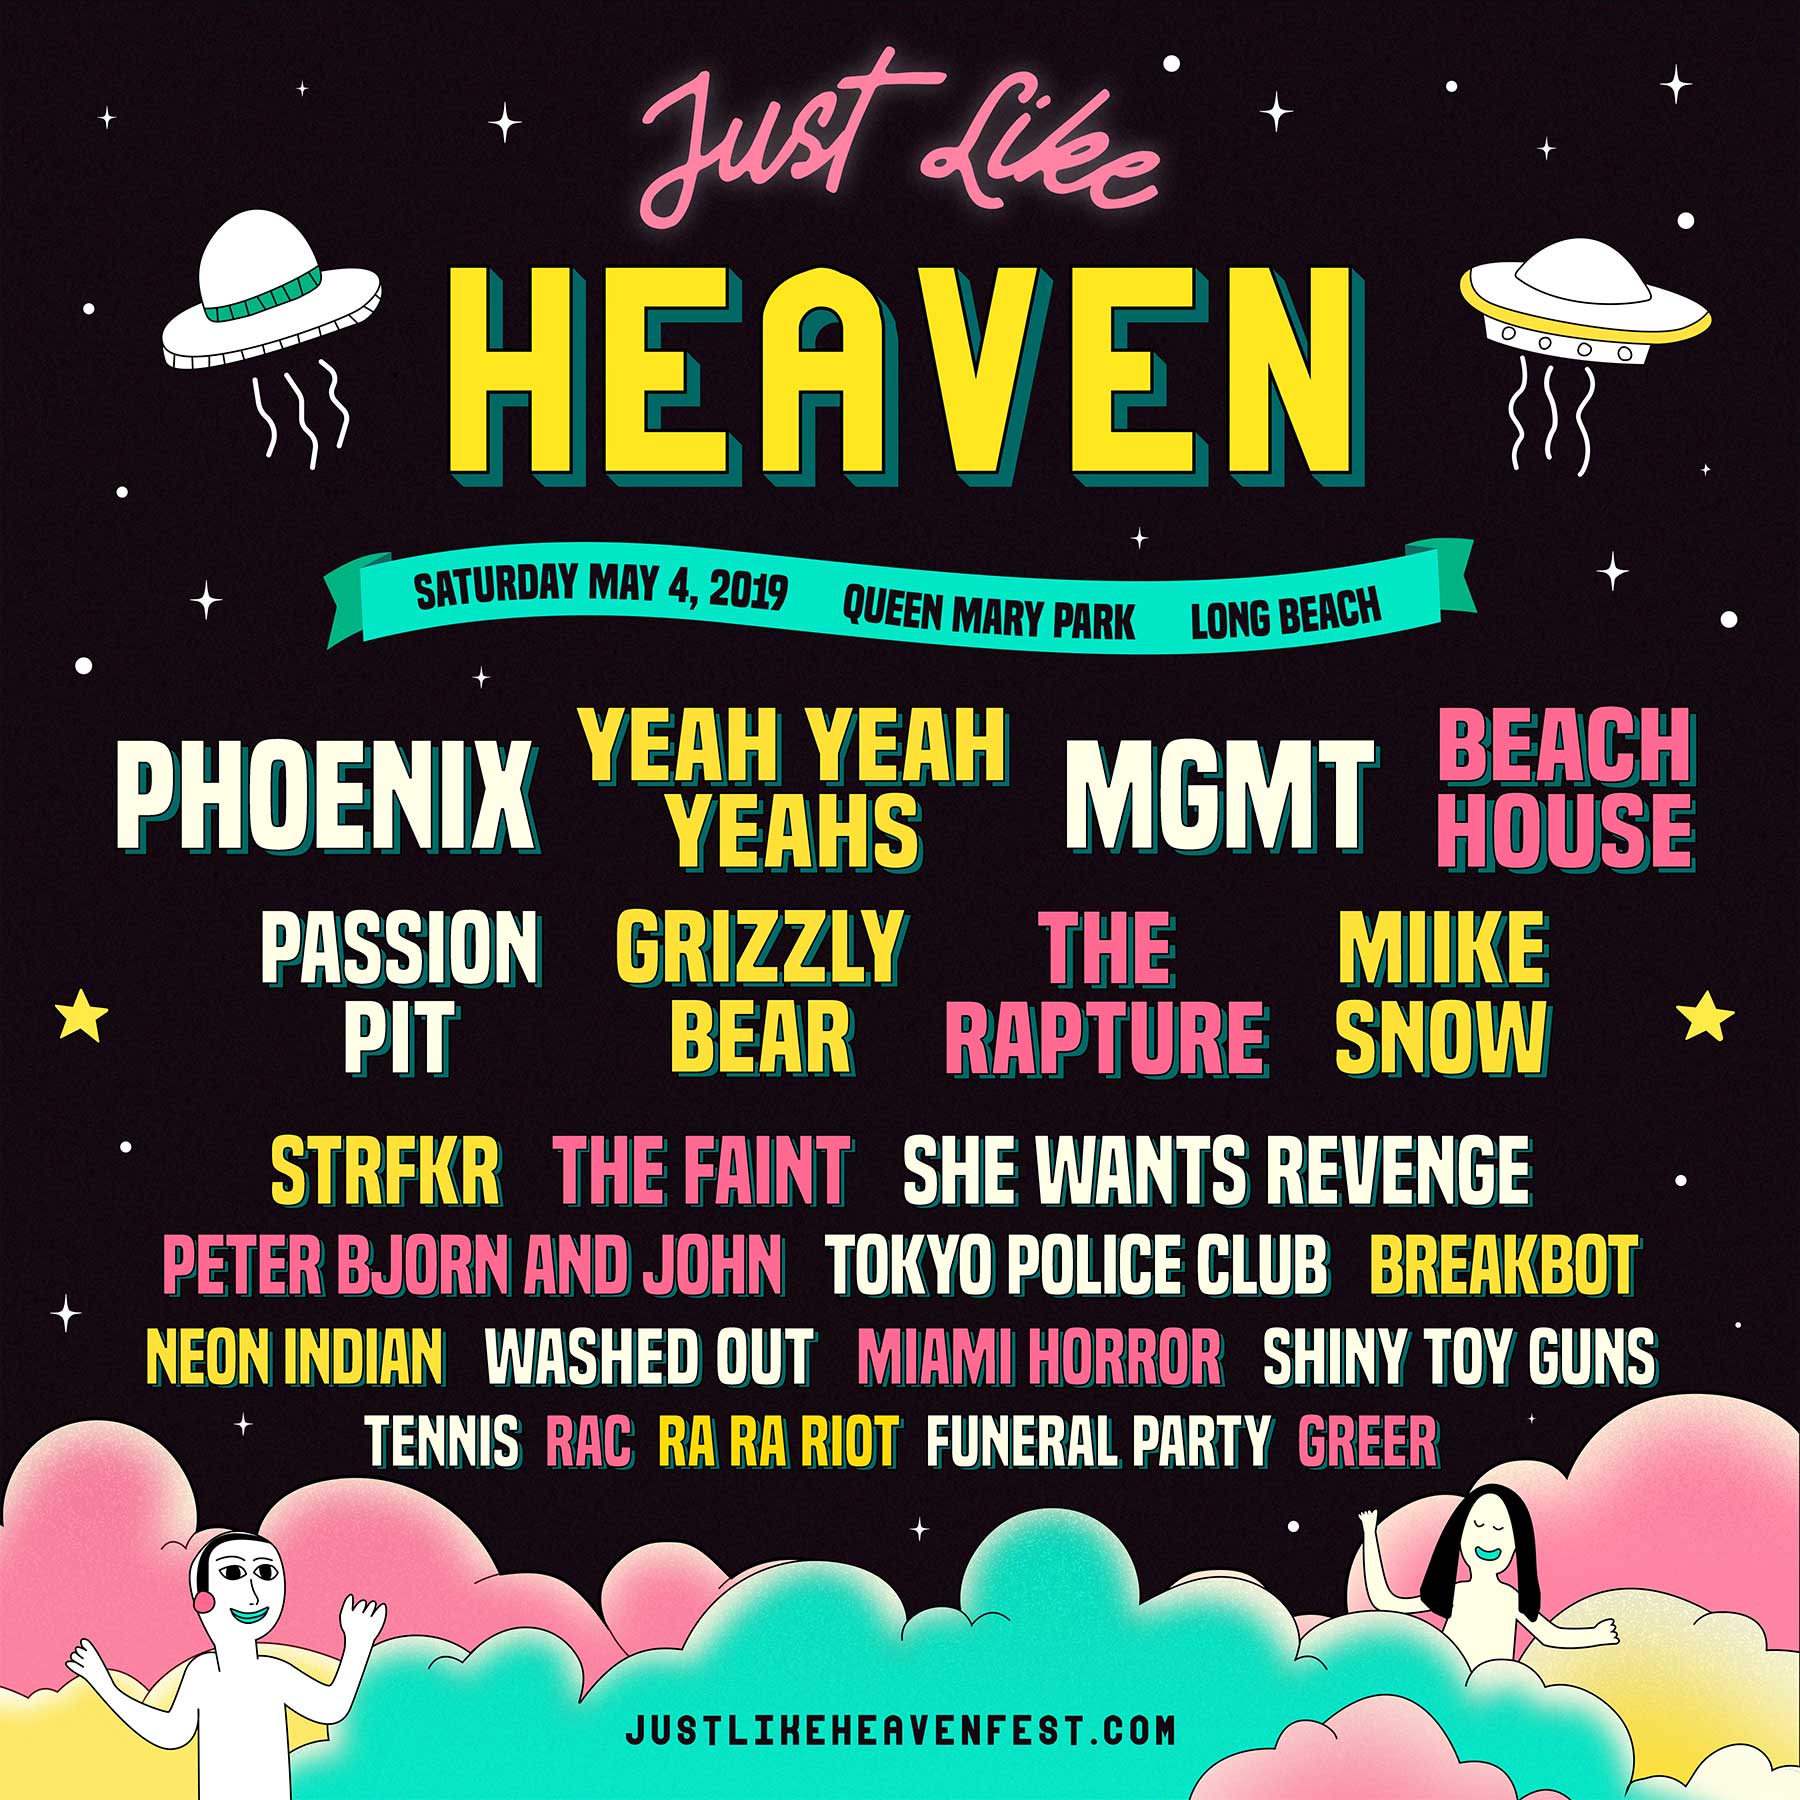 Goldenvoice Releases Lineup Feat. Miike Snow, Breakbot, and RAC For New Festival: Just Like Heaven